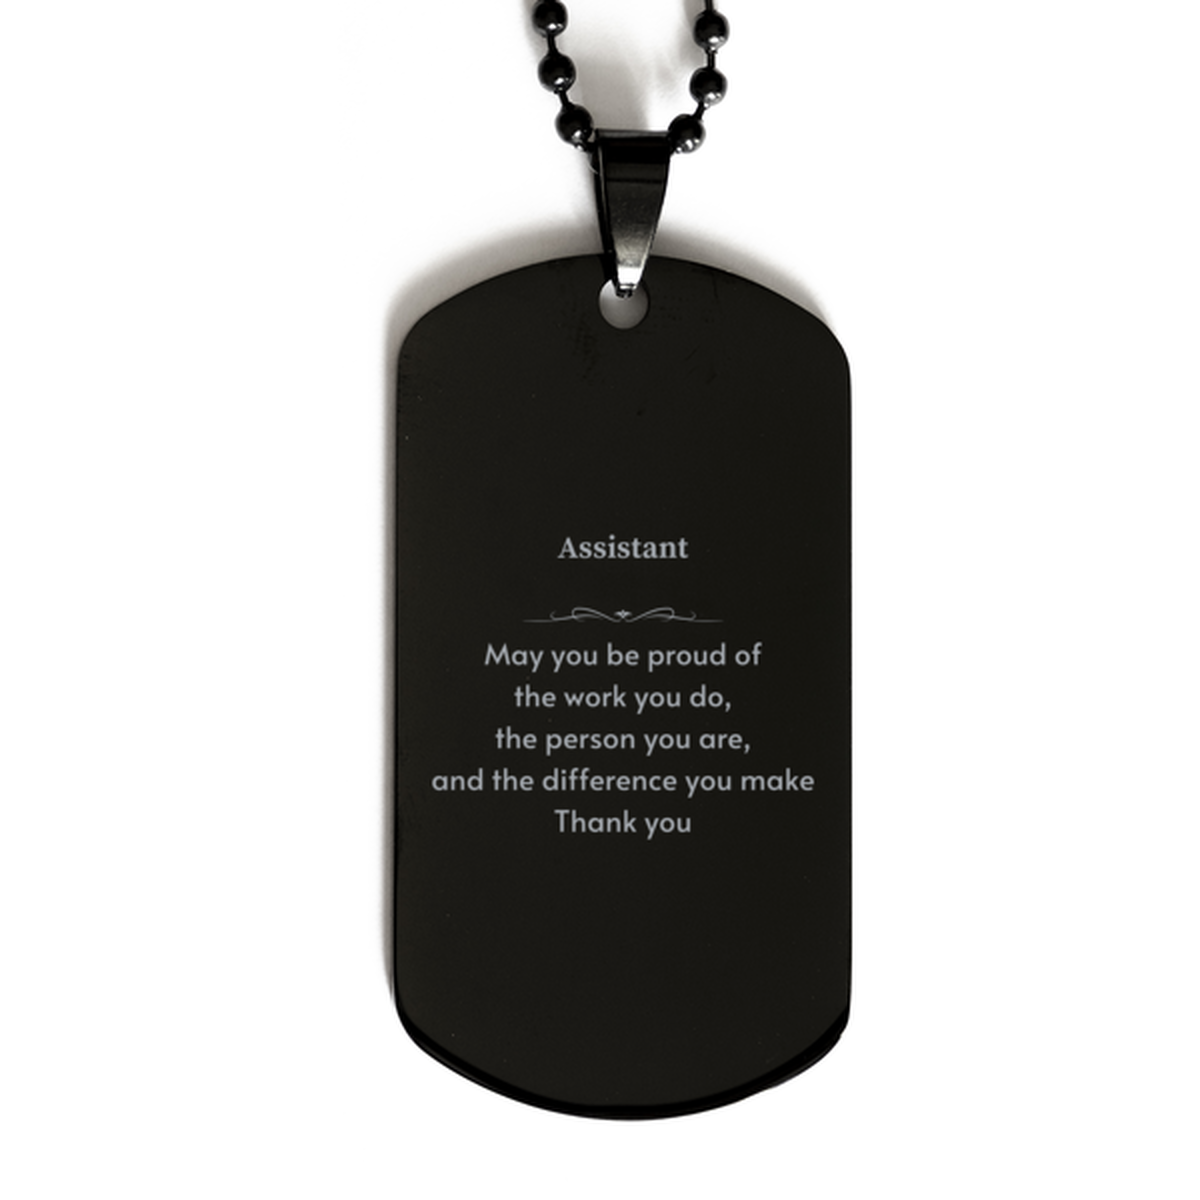 Heartwarming Black Dog Tag Retirement Coworkers Gifts for Assistant, Assistant May You be proud of the work you do, the person you are Gifts for Boss Men Women Friends